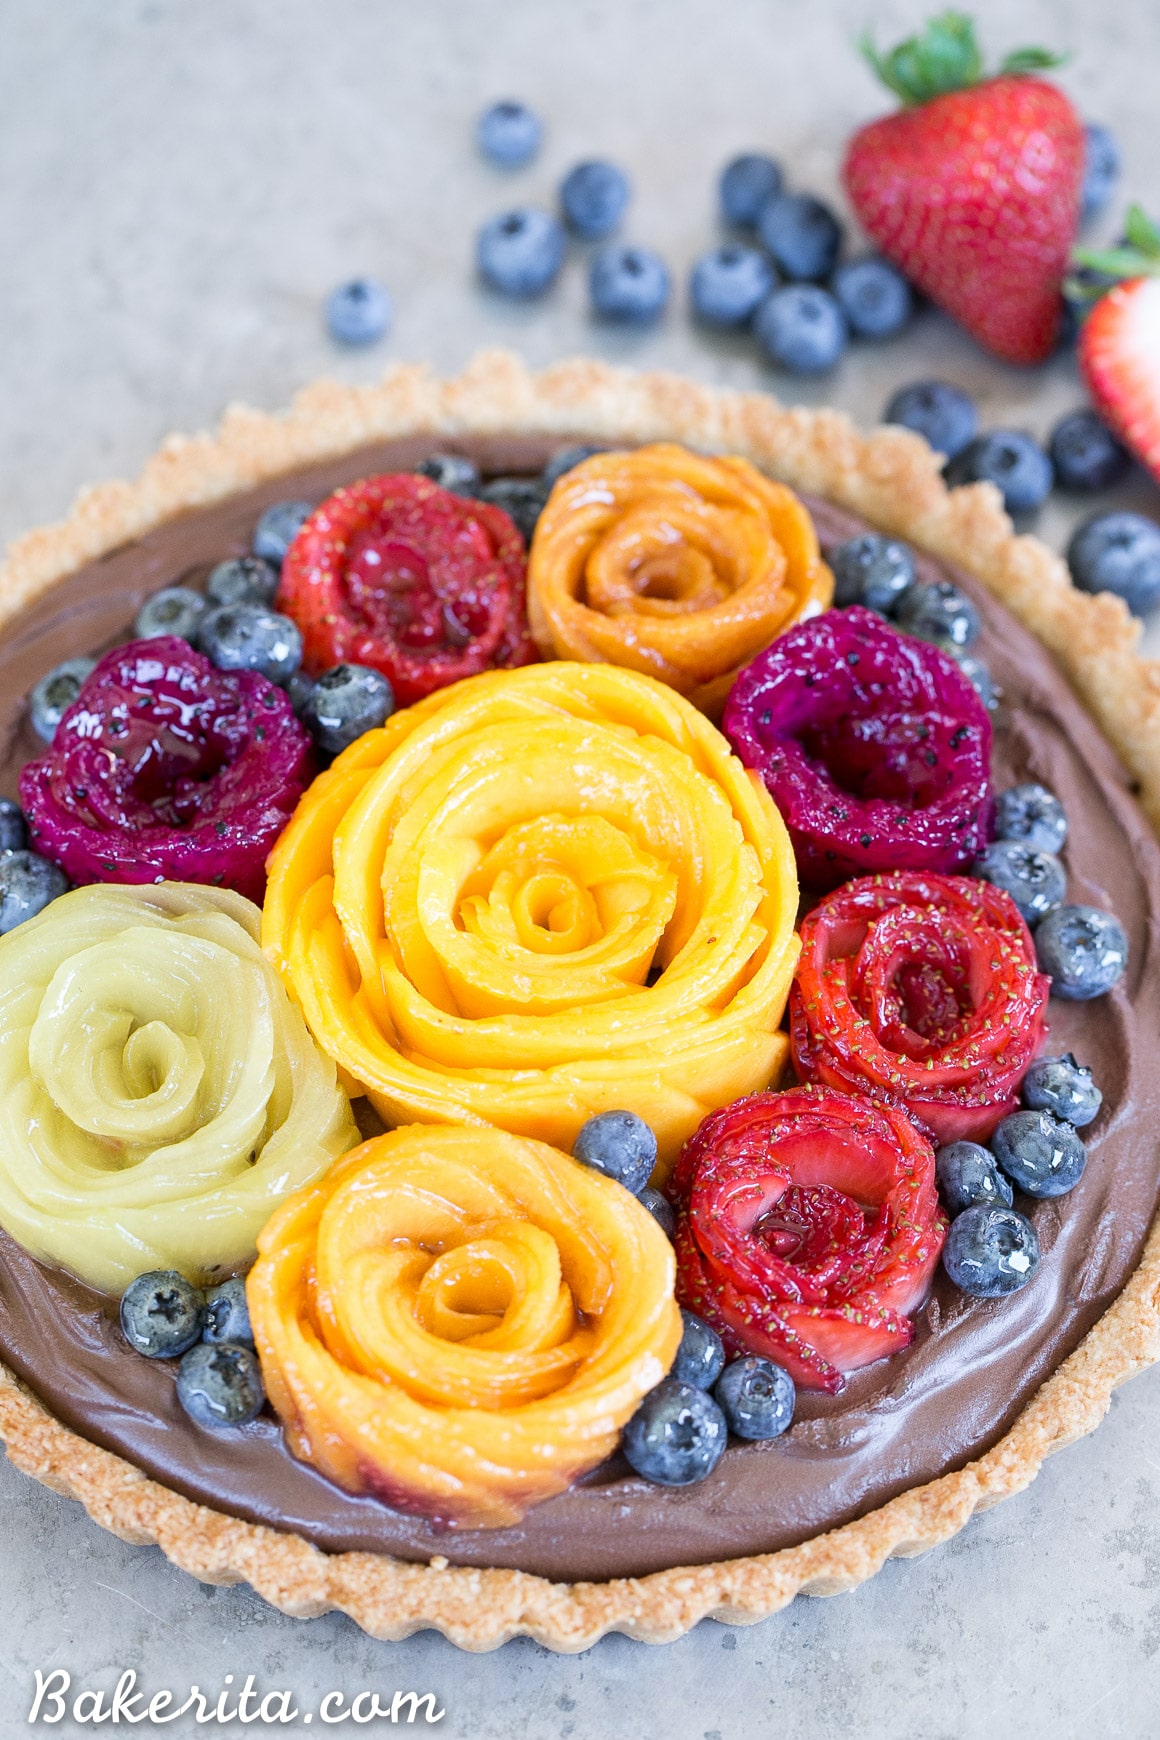 This Chocolate Mousse Tart with Coconut Crust + Fresh Fruit Flowers has the most incredible vegan chocolate mousse filling! You'd never guess that this rich dessert is gluten-free, Paleo, and vegan.